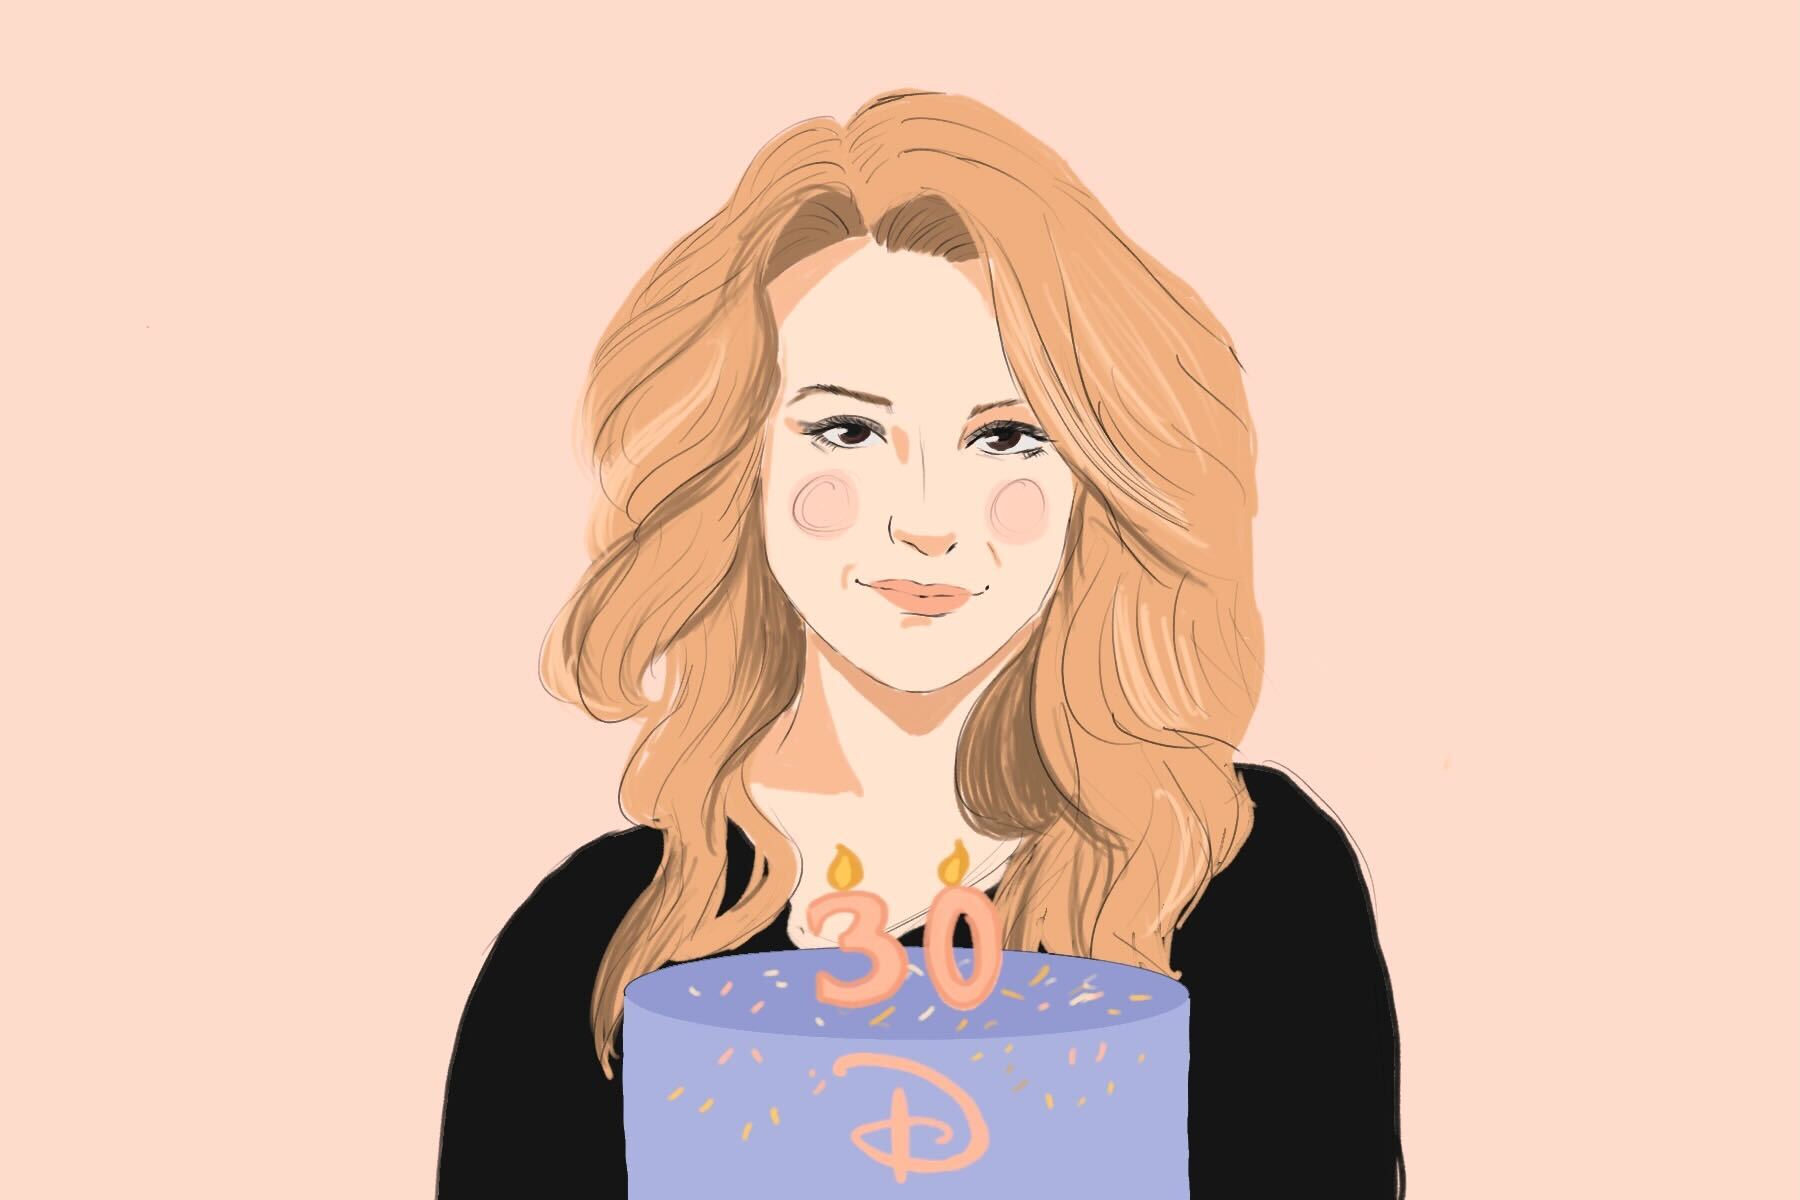 An illustration of Bridgit Mendler standing in front of a 30th birthday cake